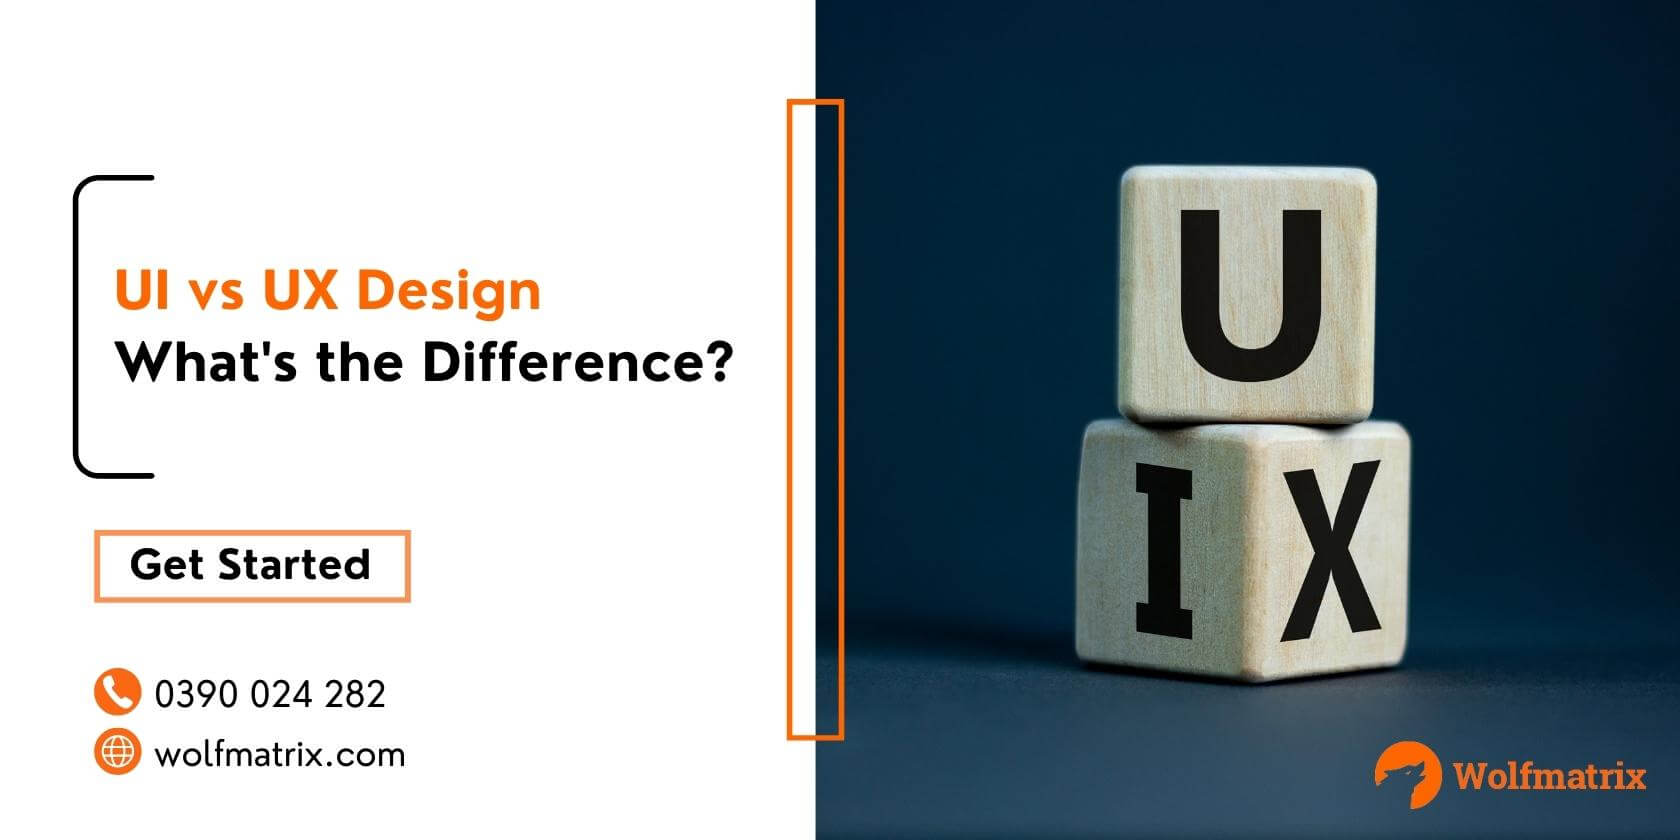 Wolfmatrix Australia UI vs UX Design What's the Difference?